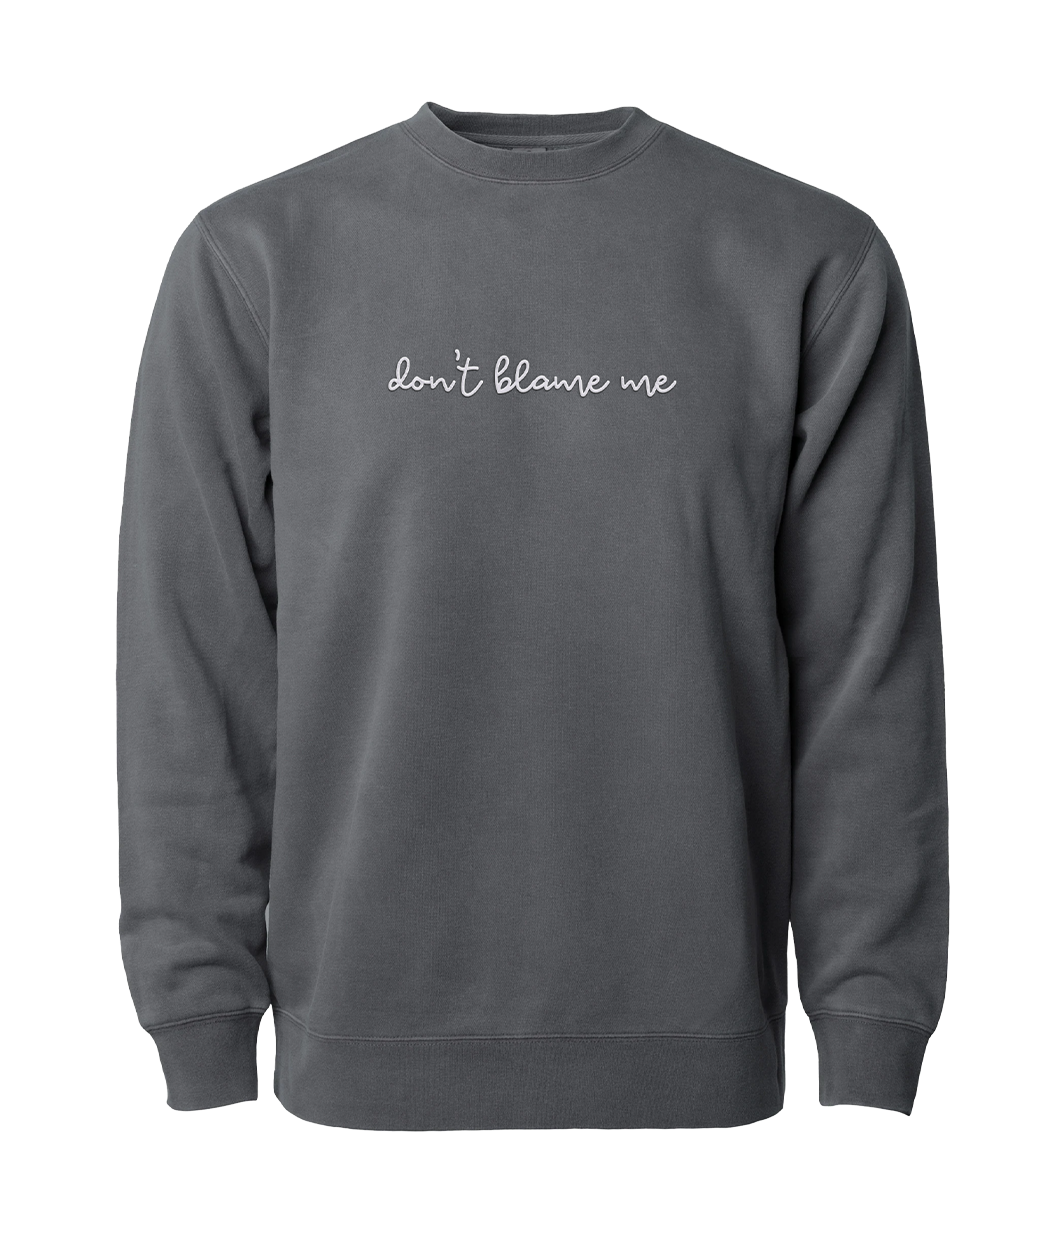 Gray crewneck sweatshirt with “don’t blame me” across chest in white cursive font - from Don’t Blame Me